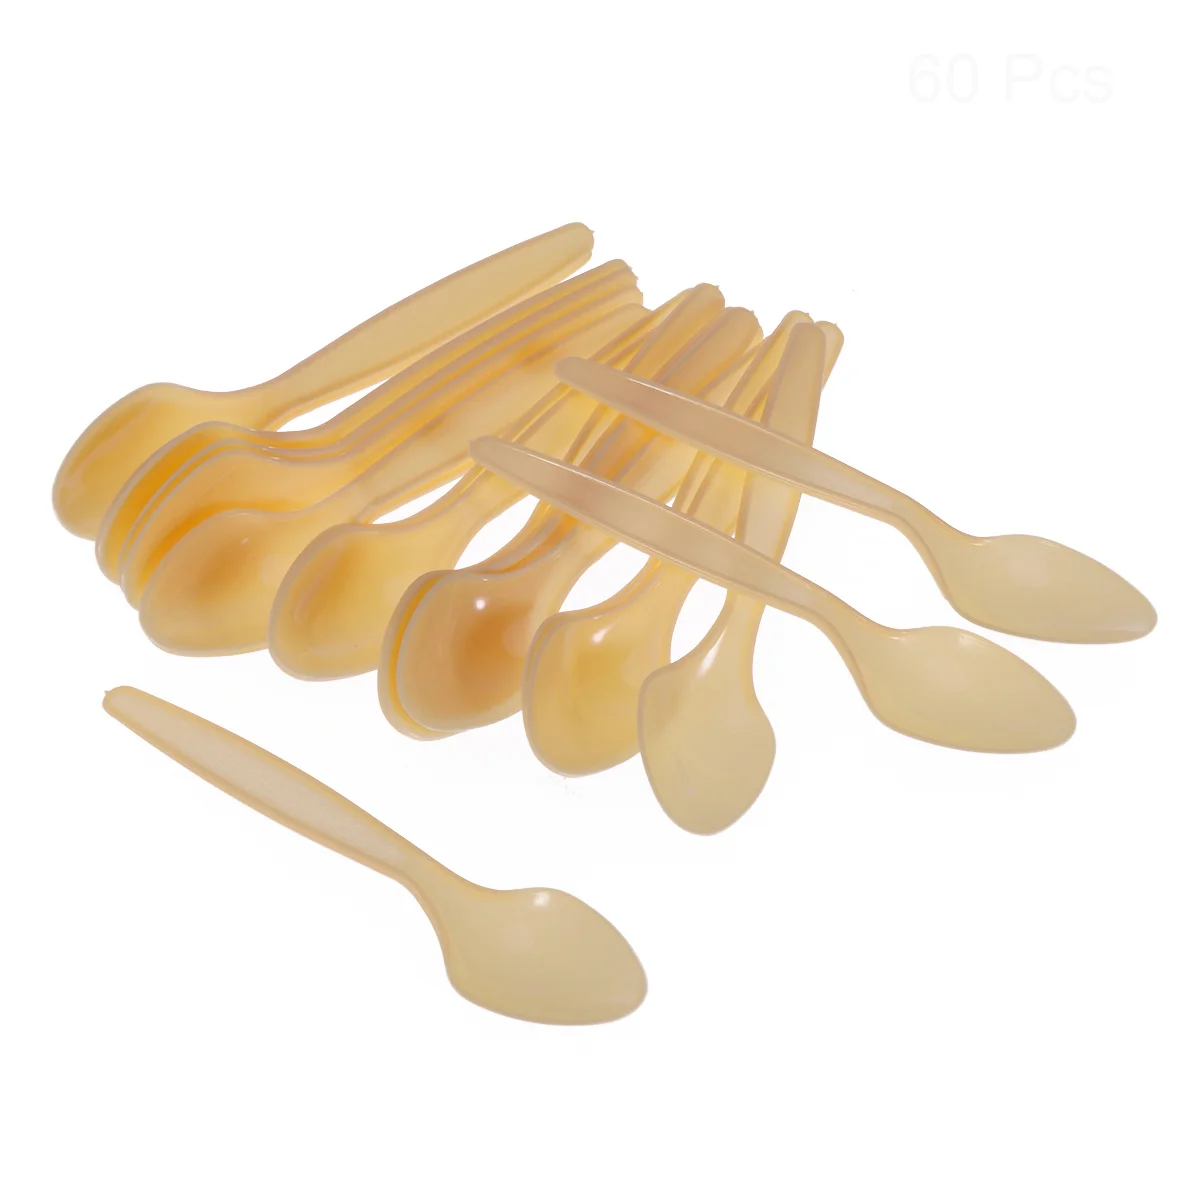 

Clear Spoons Utensils Look Mica Only Large Resistant Heat That Medium Like Wood Weight Heavyweight Flatware Inches Appetizers